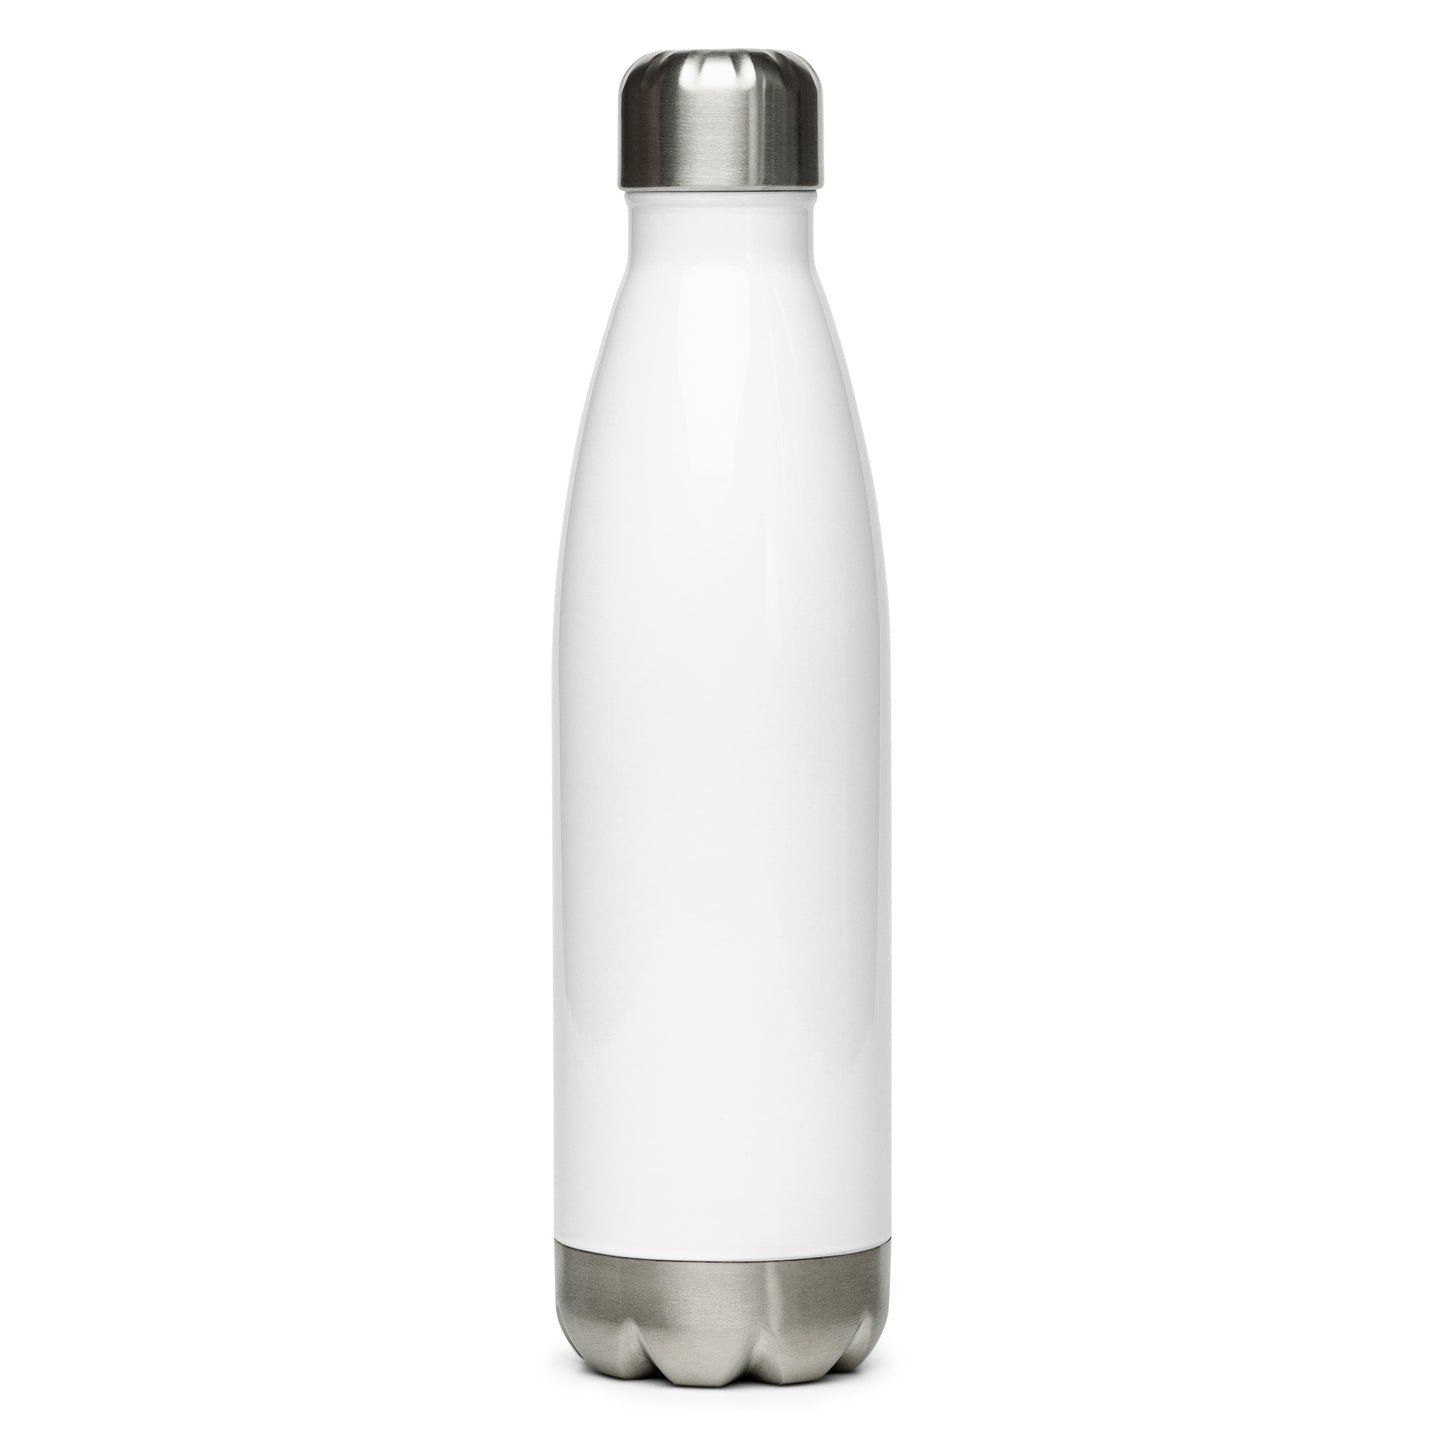 Protected Dreams Stainless Steel Water Bottle